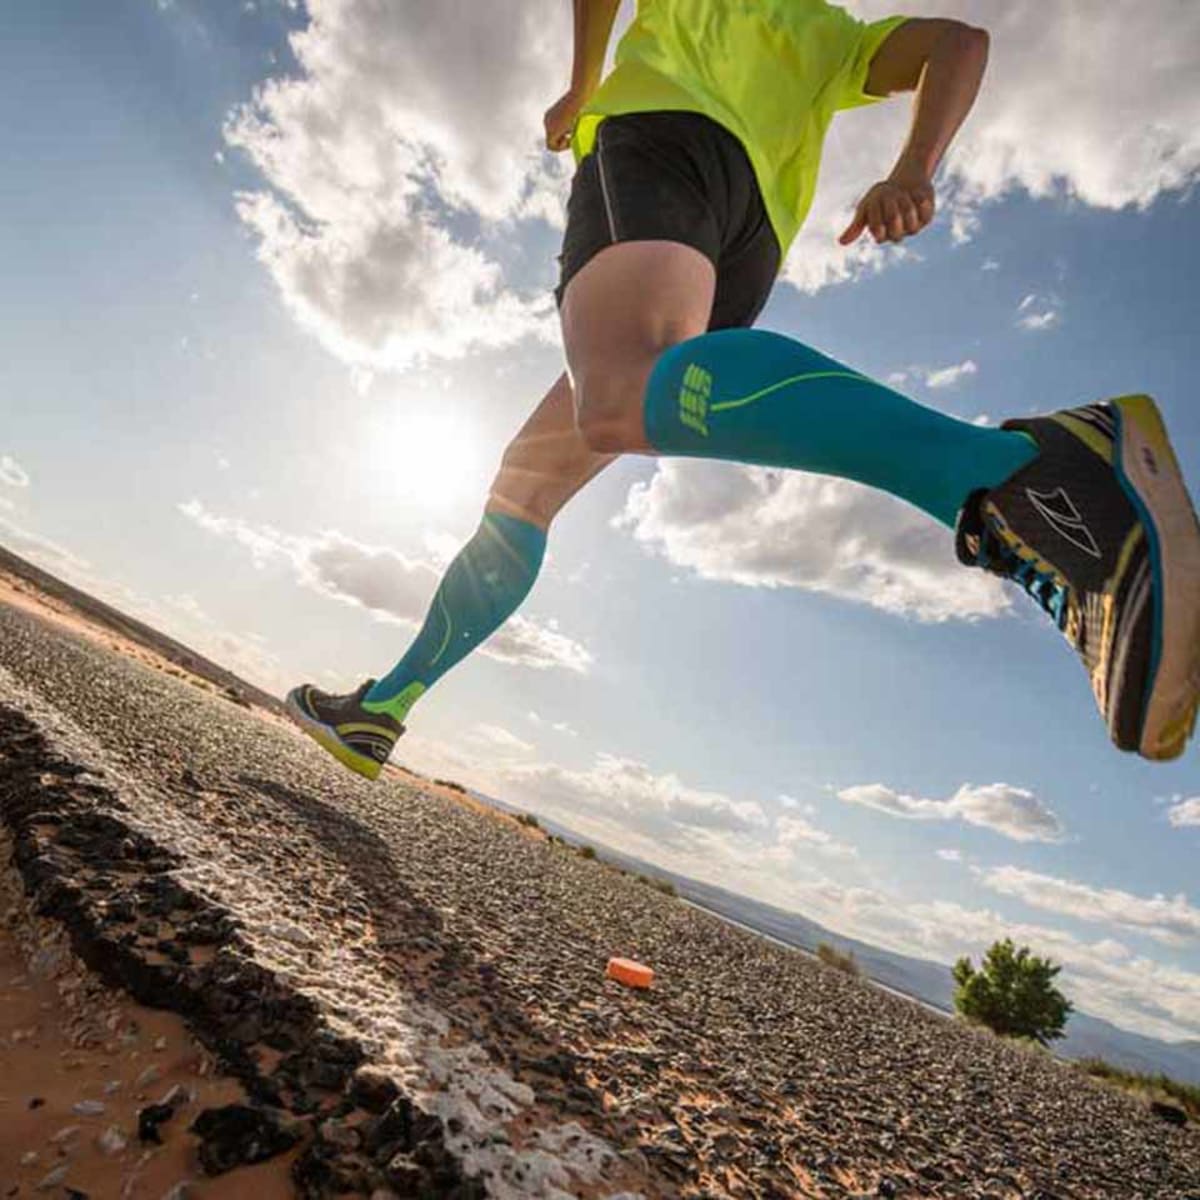 The 10 best performance socks for runners, lifters, and athletes